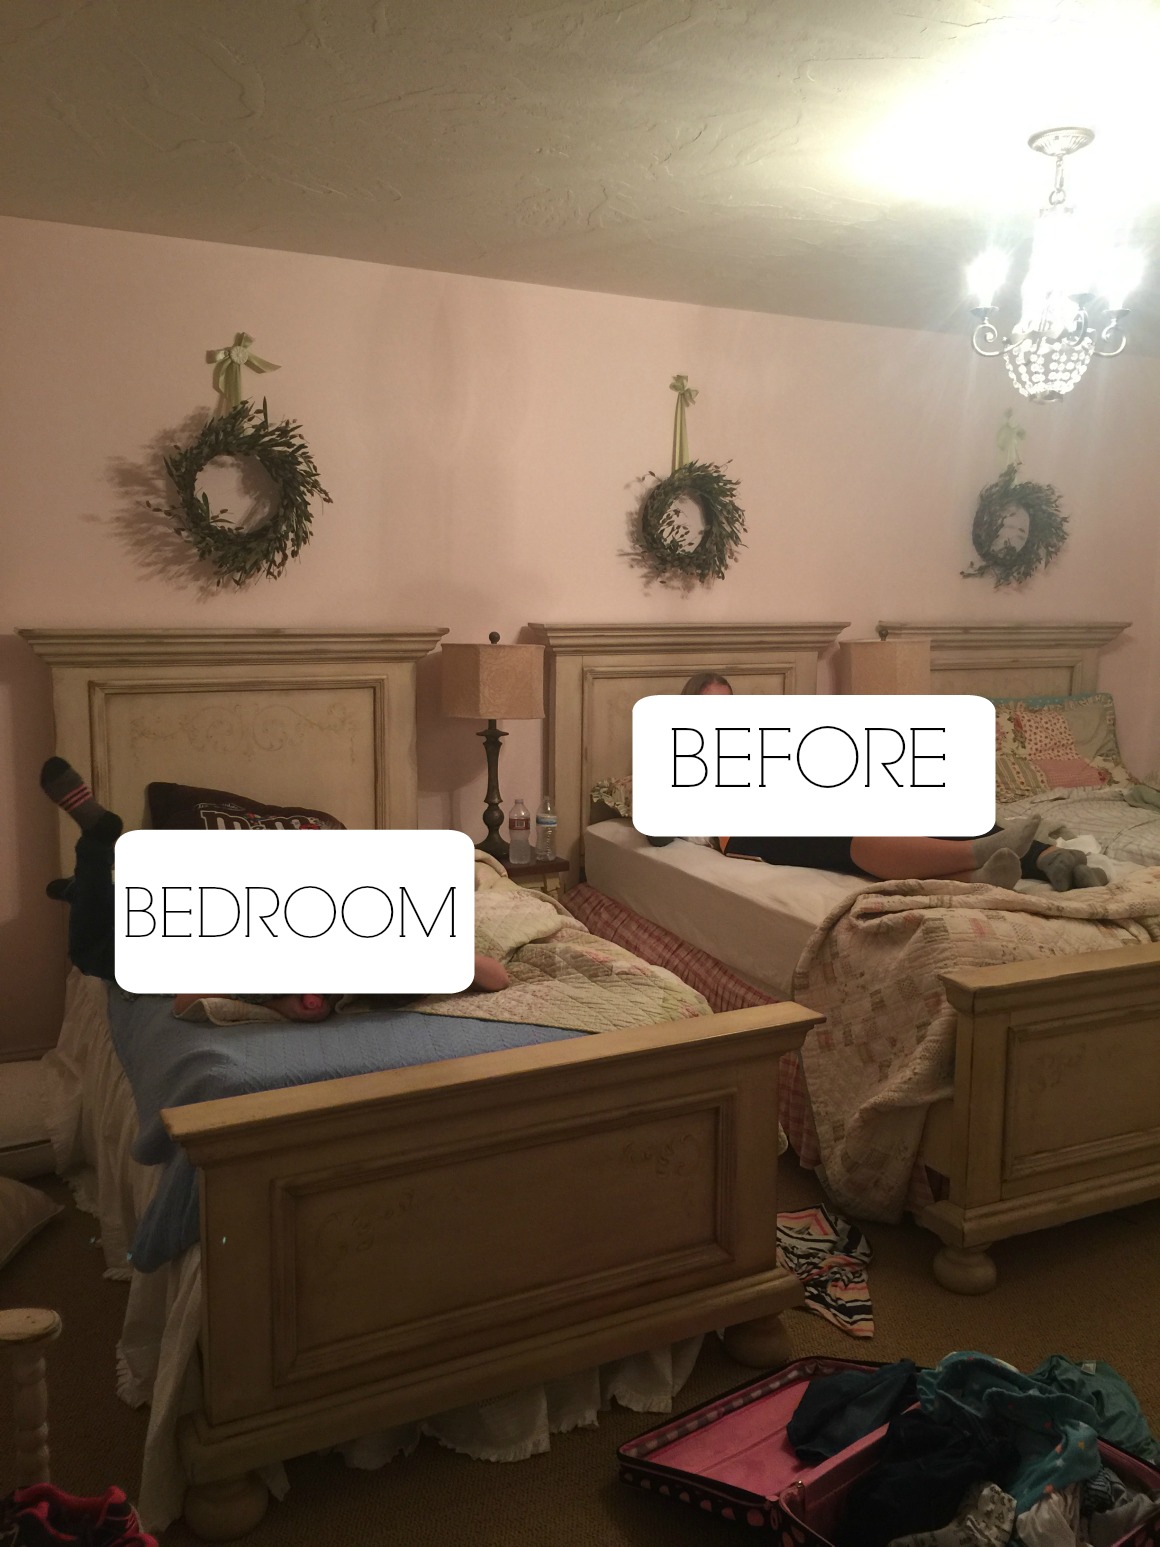 Bed and Bedding TIPS and Makeover